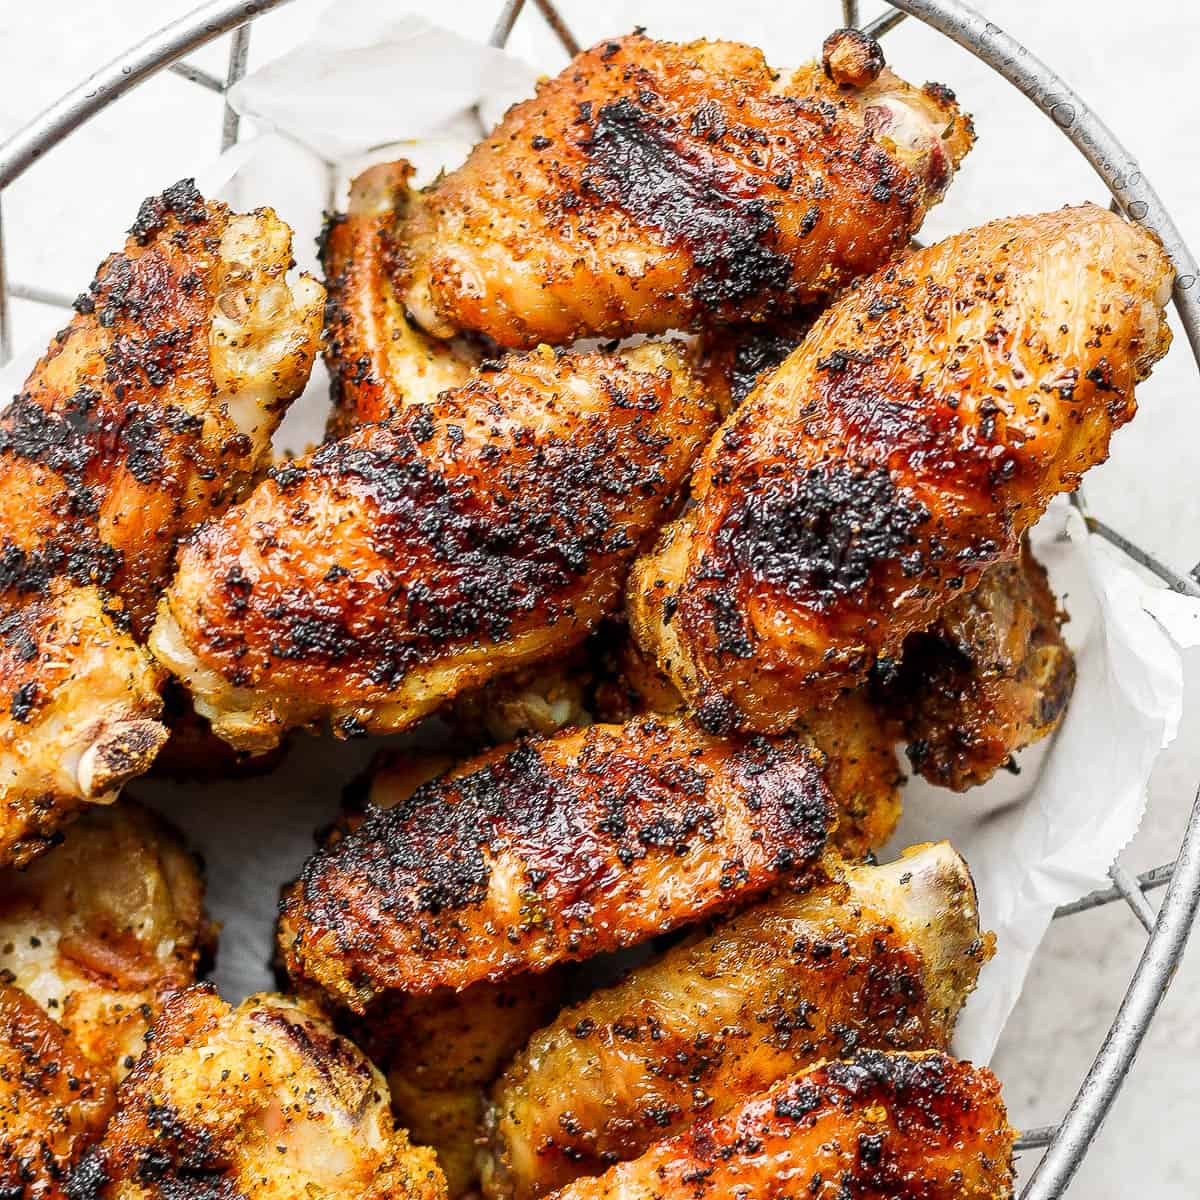 https://thewoodenskillet.com/wp-content/uploads/2021/09/grilled-chicken-wings-recipe-1.jpg